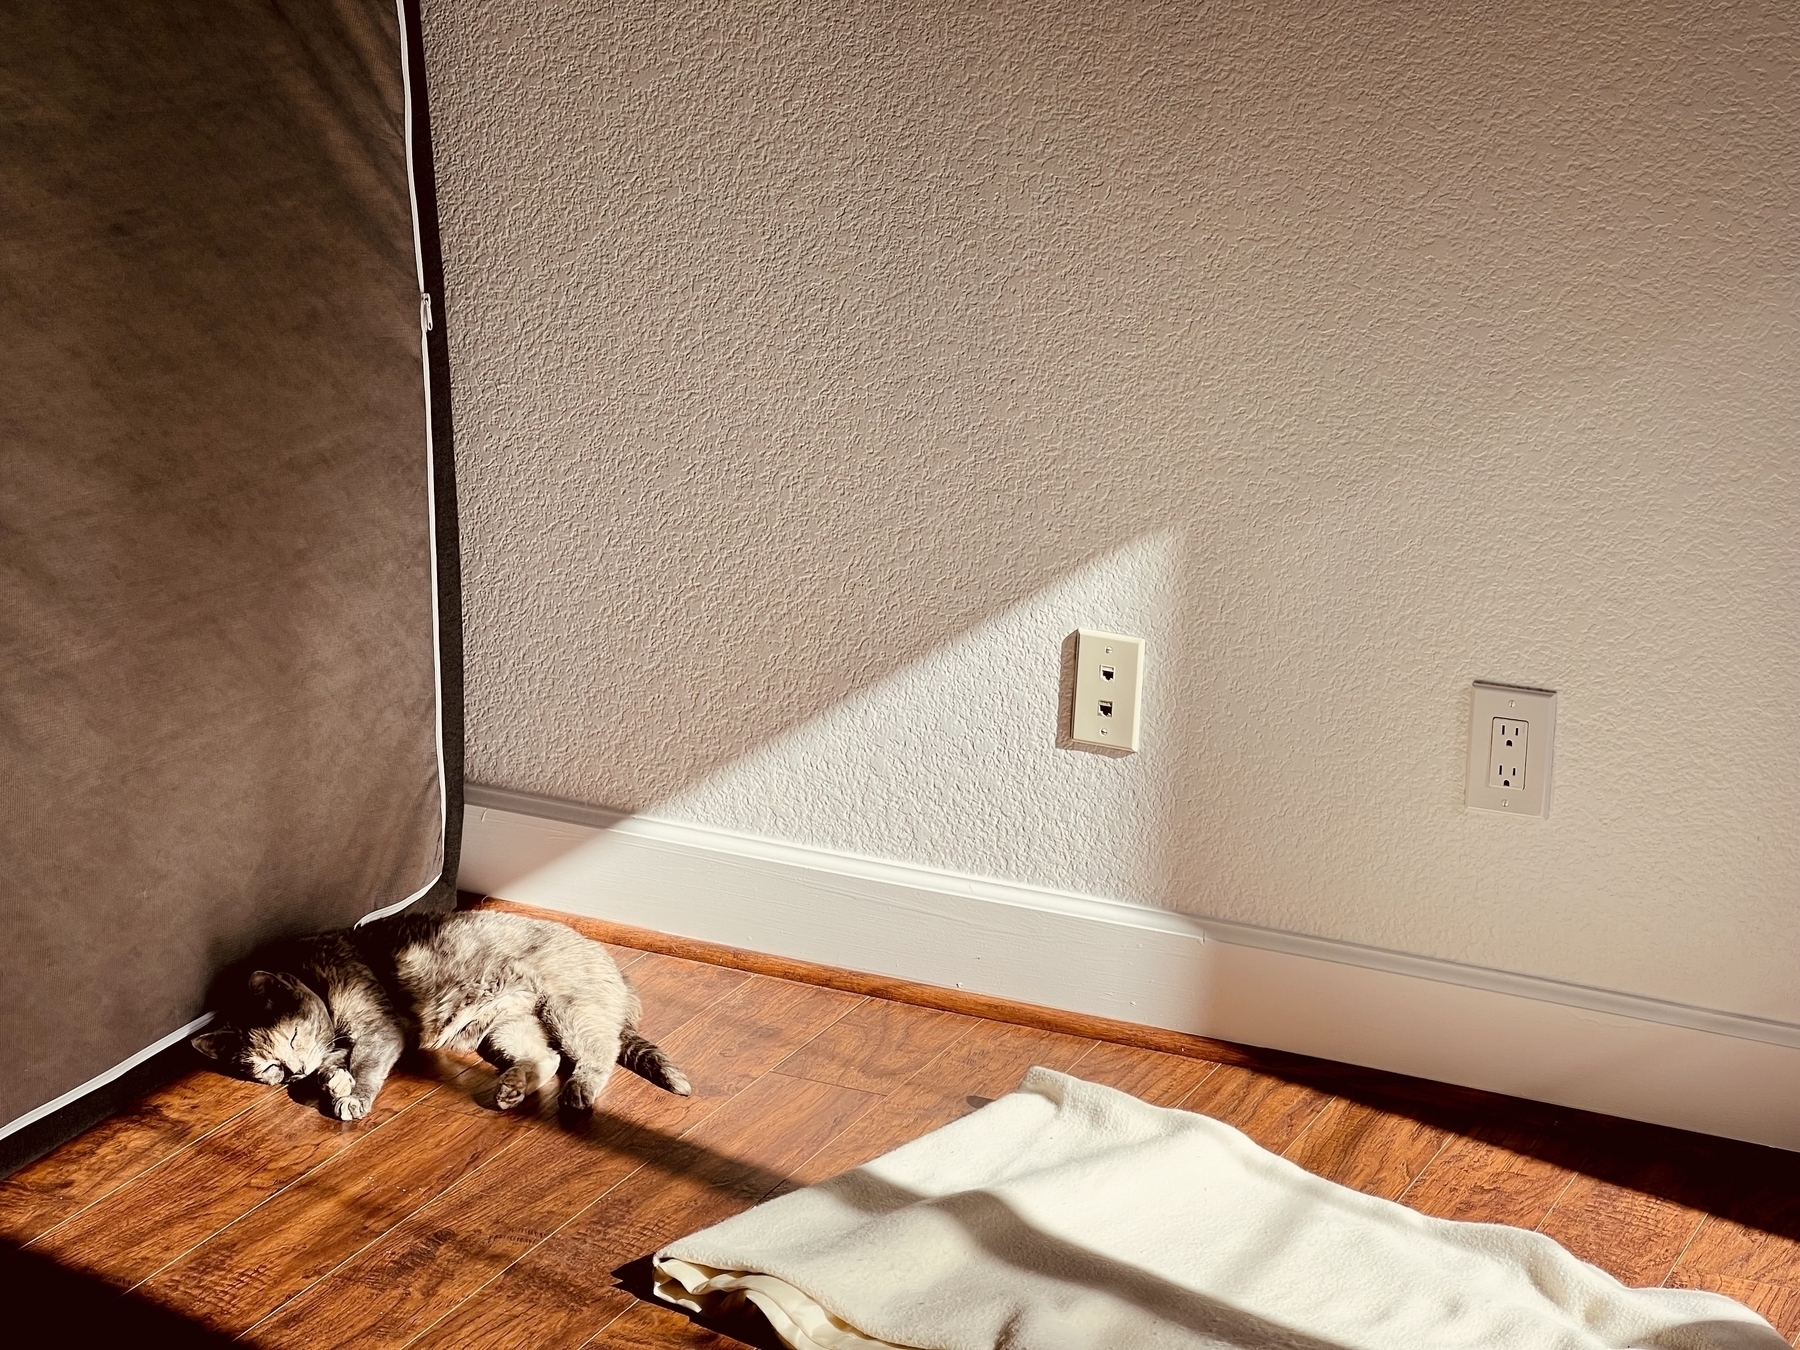 A small grey cat sleeping on the floor in the sunlight coming from an off-camera window. 